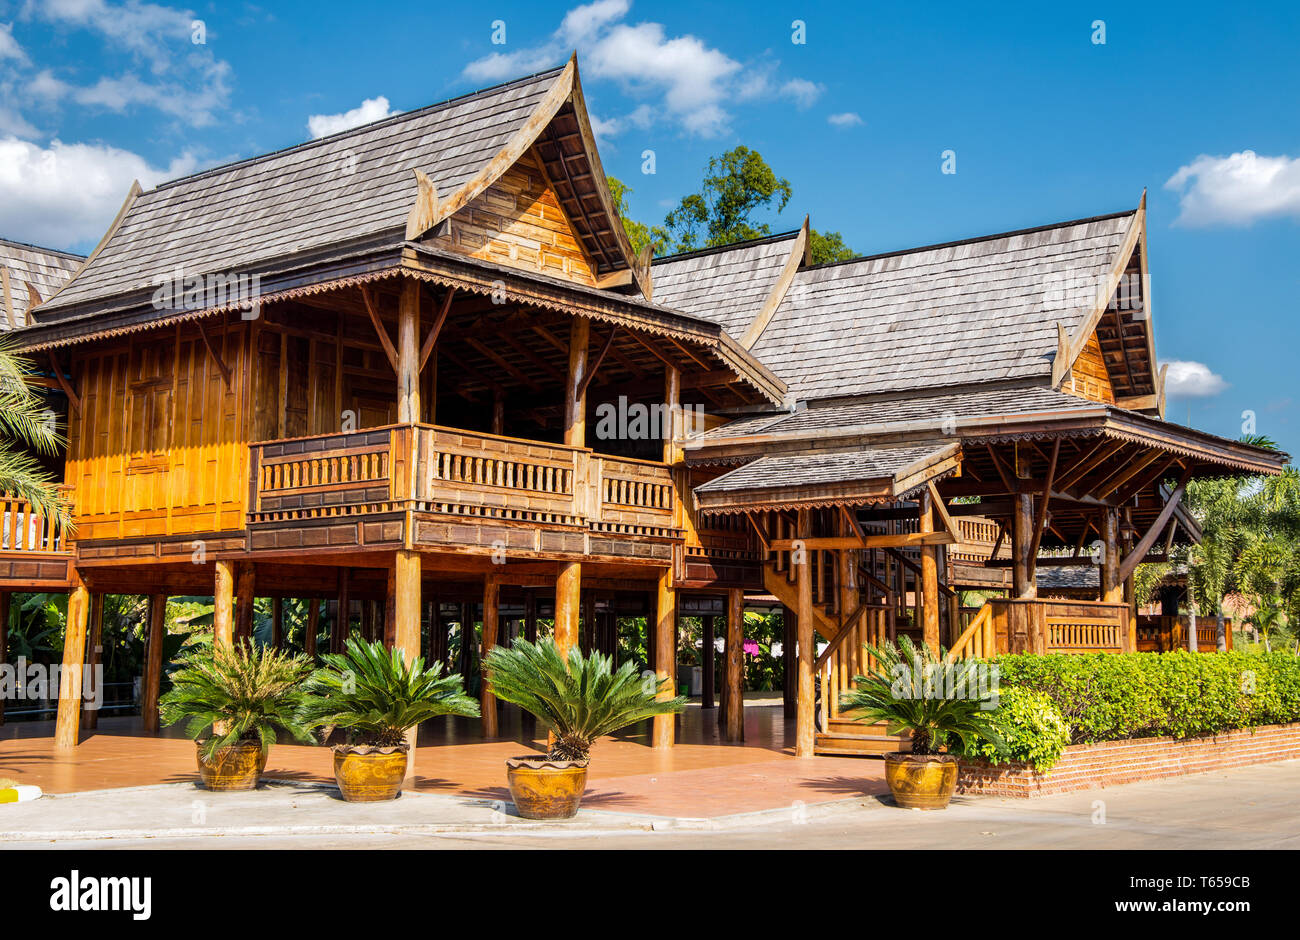 Typical Thai teakwood houses in the north of Thailand, Asia Stock Photo